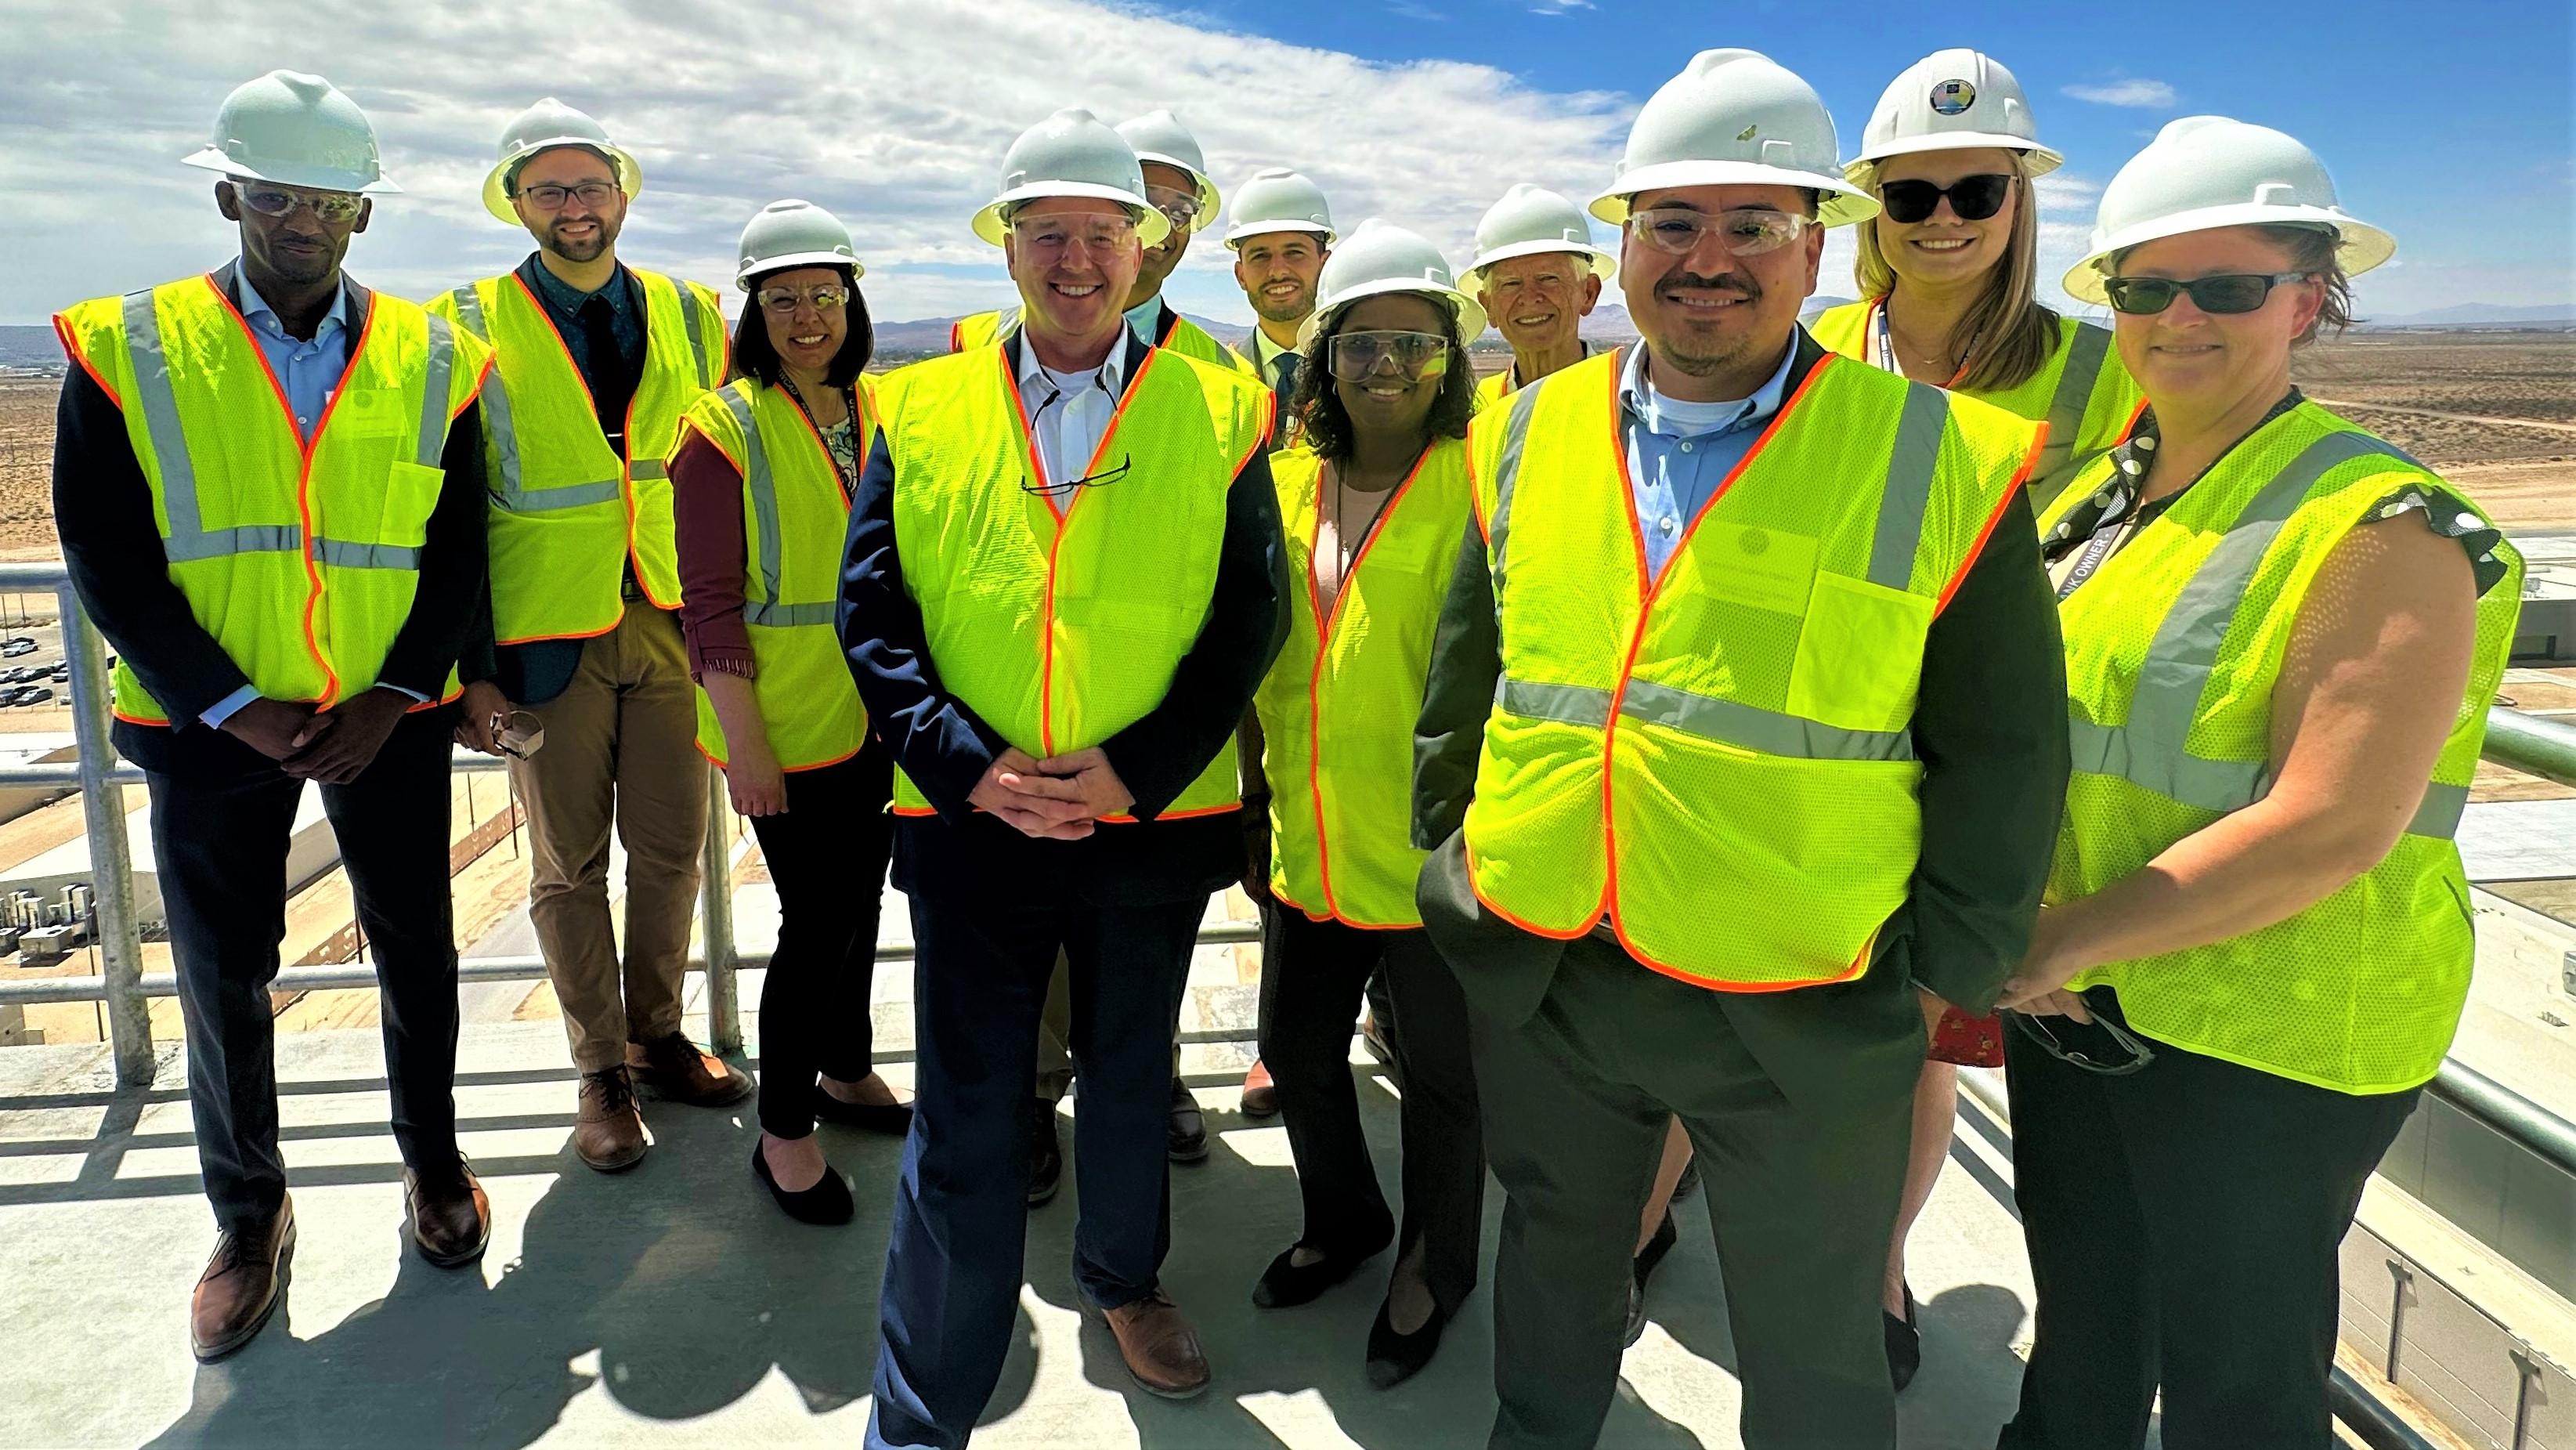 Participants from the NAVAIR Leadership Development Program 2020 cohort shown atop the newly constructed China Lake Air Traffic Control Tower.